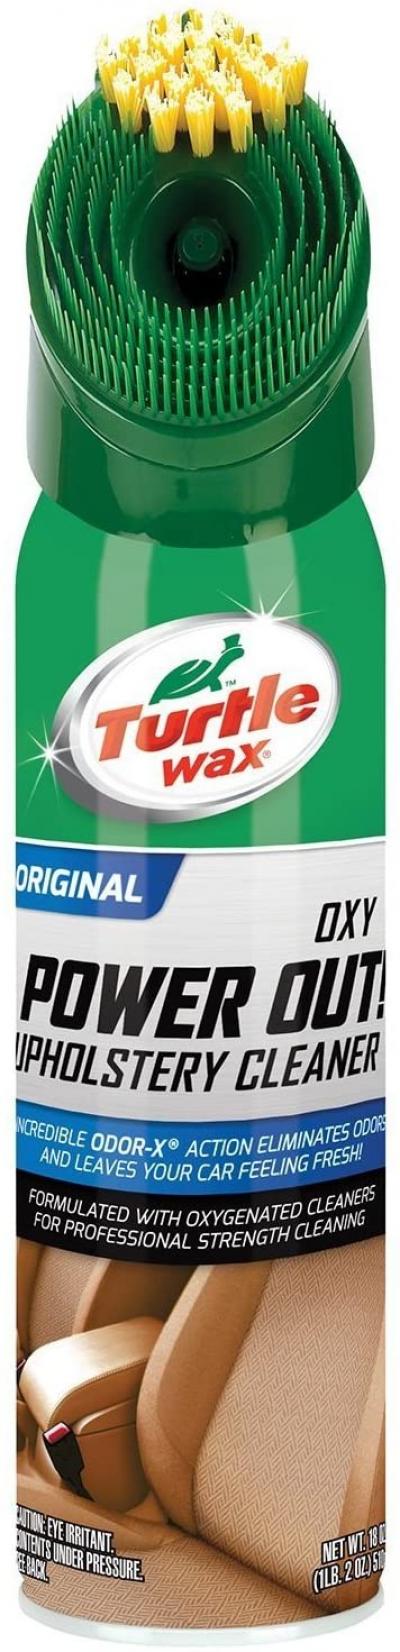 Turtle Wax Oxy Power Out Automotive Upholstery Cleaner 18oz.